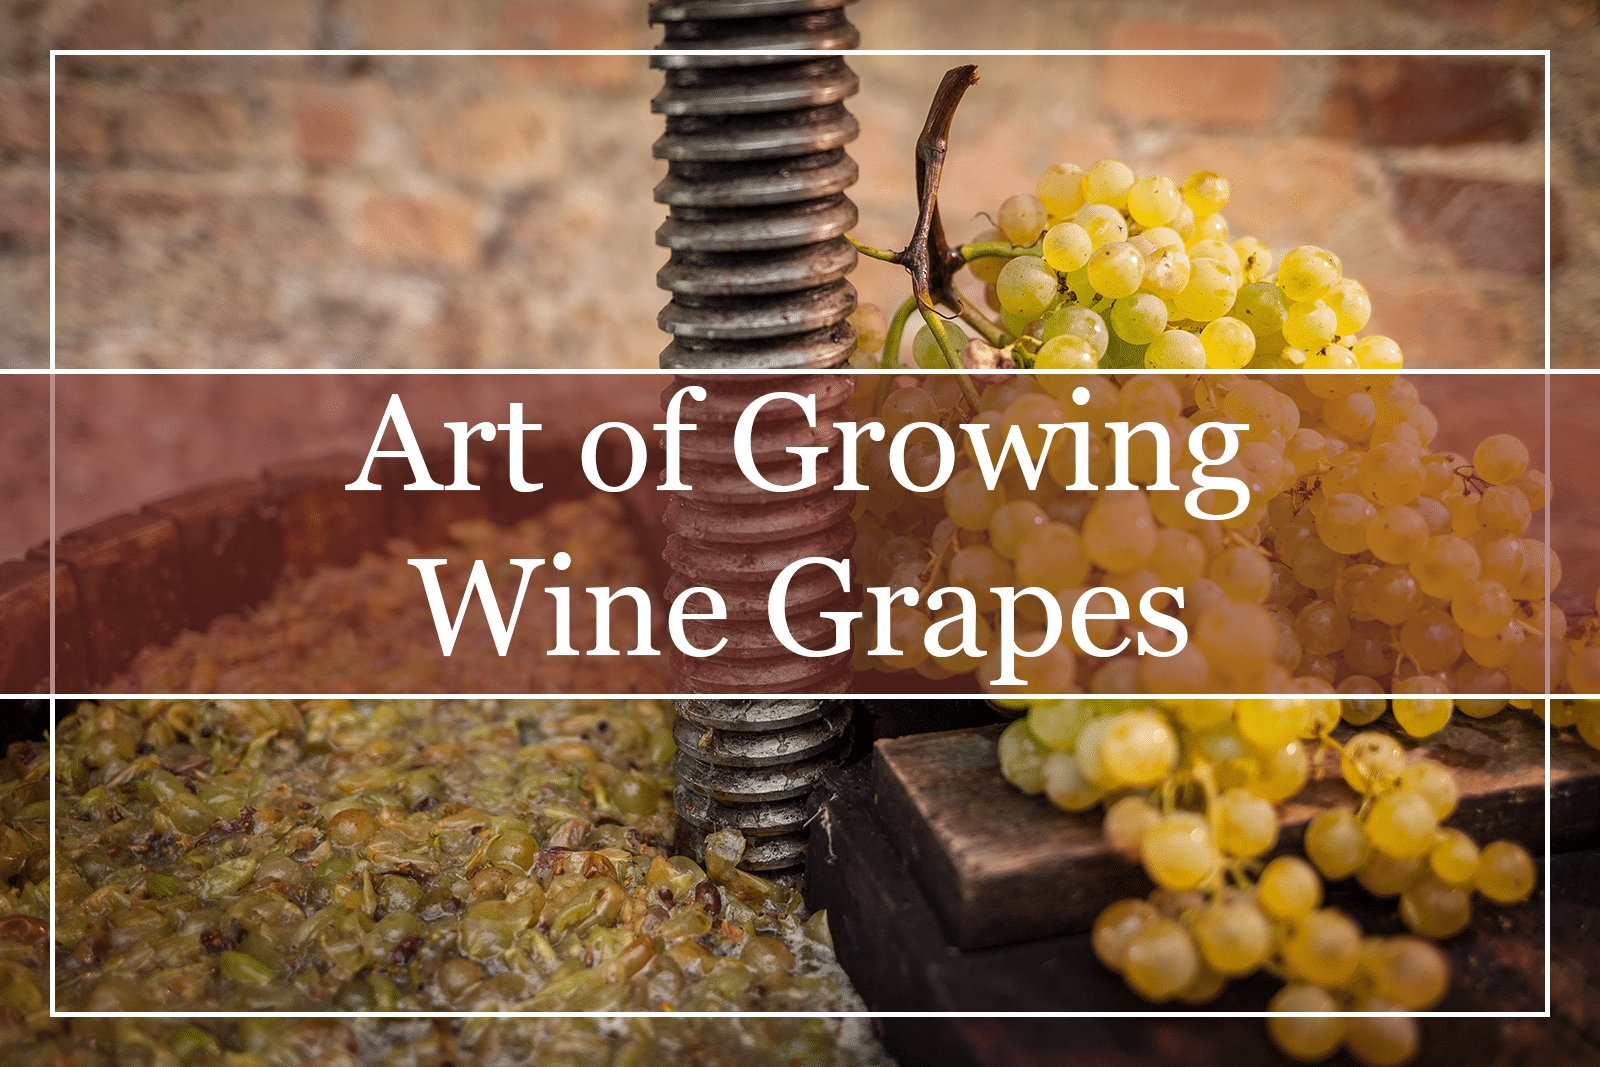 Viniculture - Art of Growing Wine Grapes